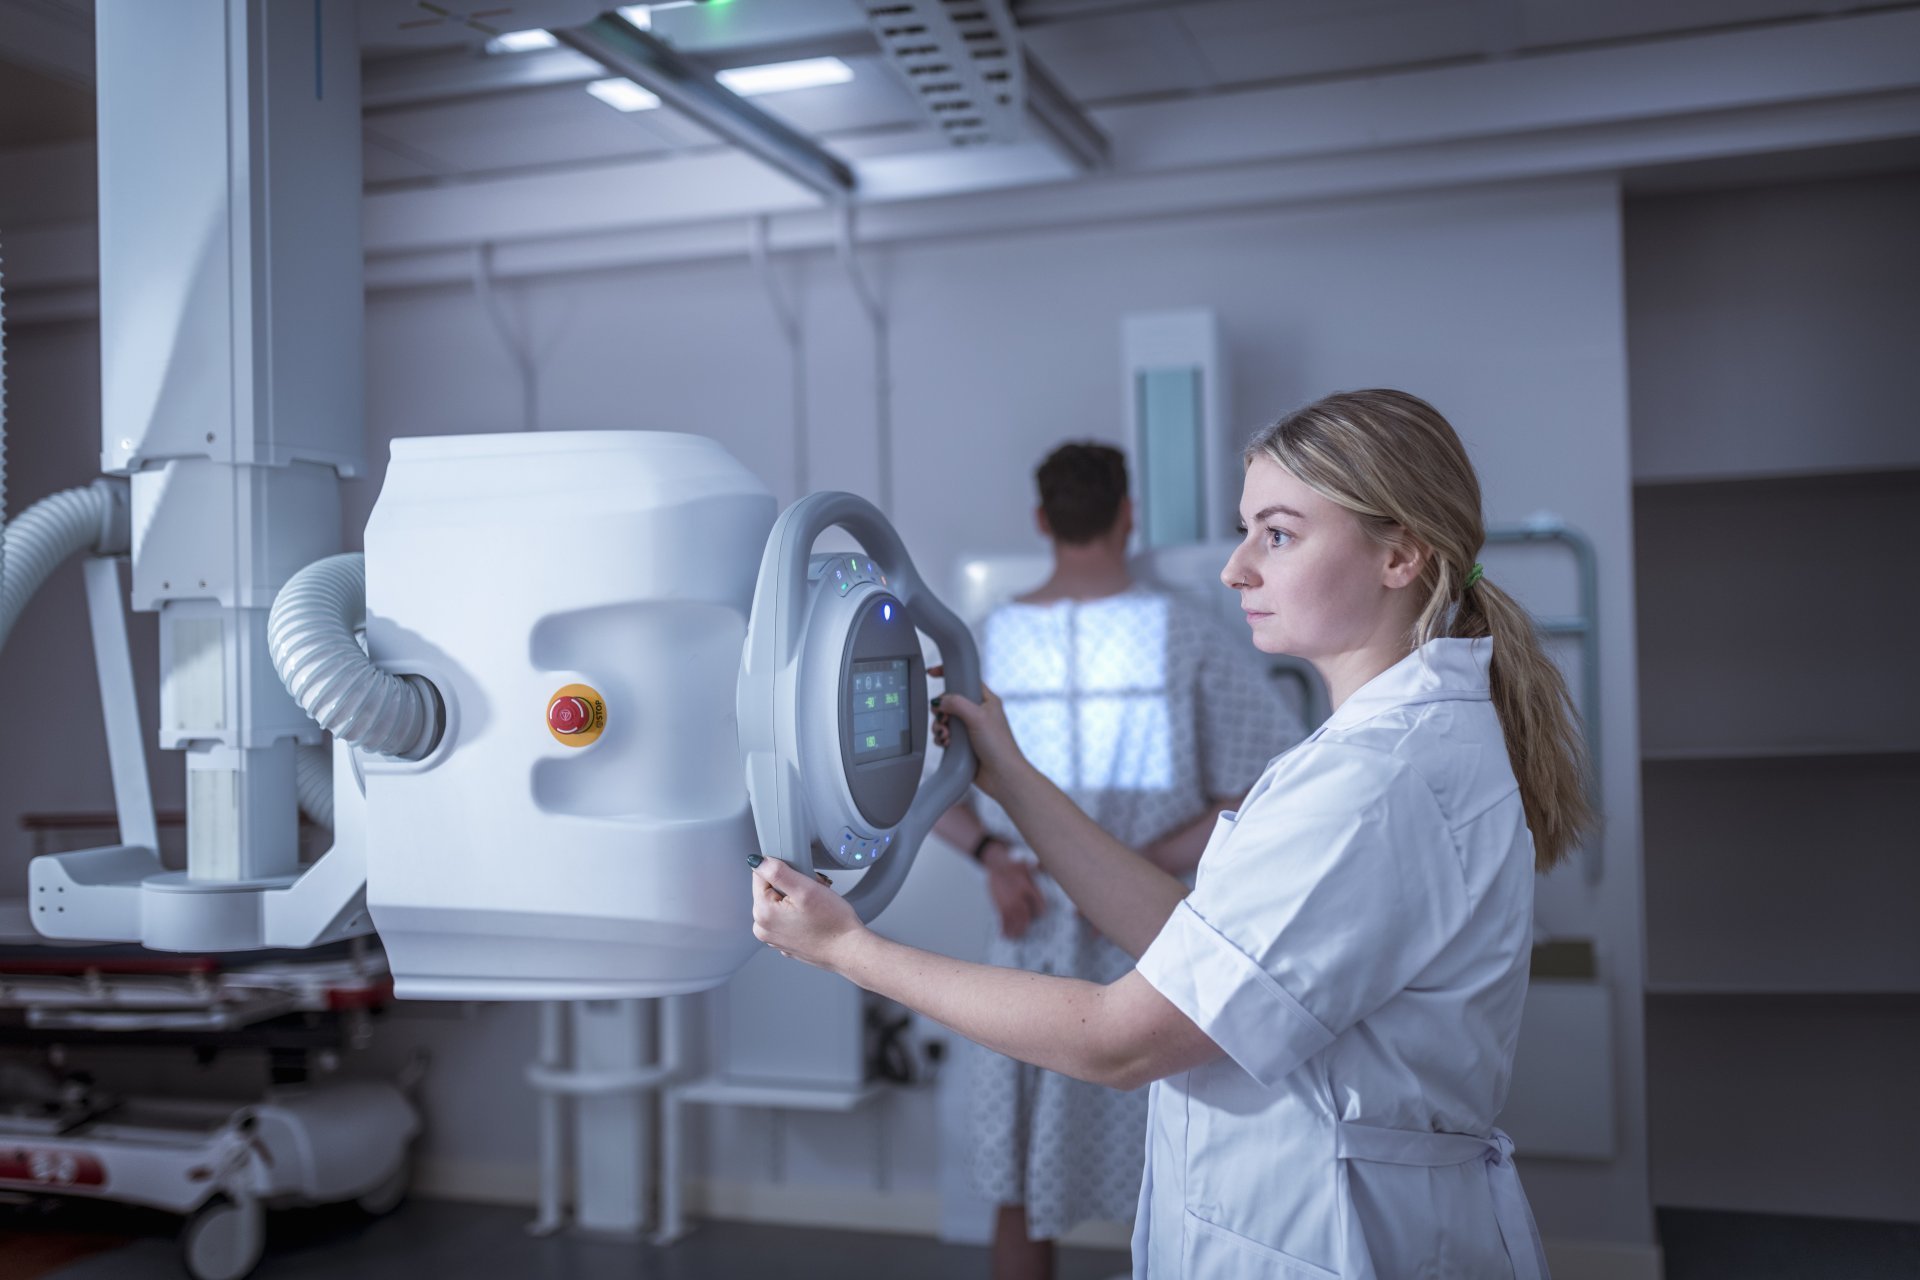 A young female radiologist positions an x-ray machine to examine her patient.